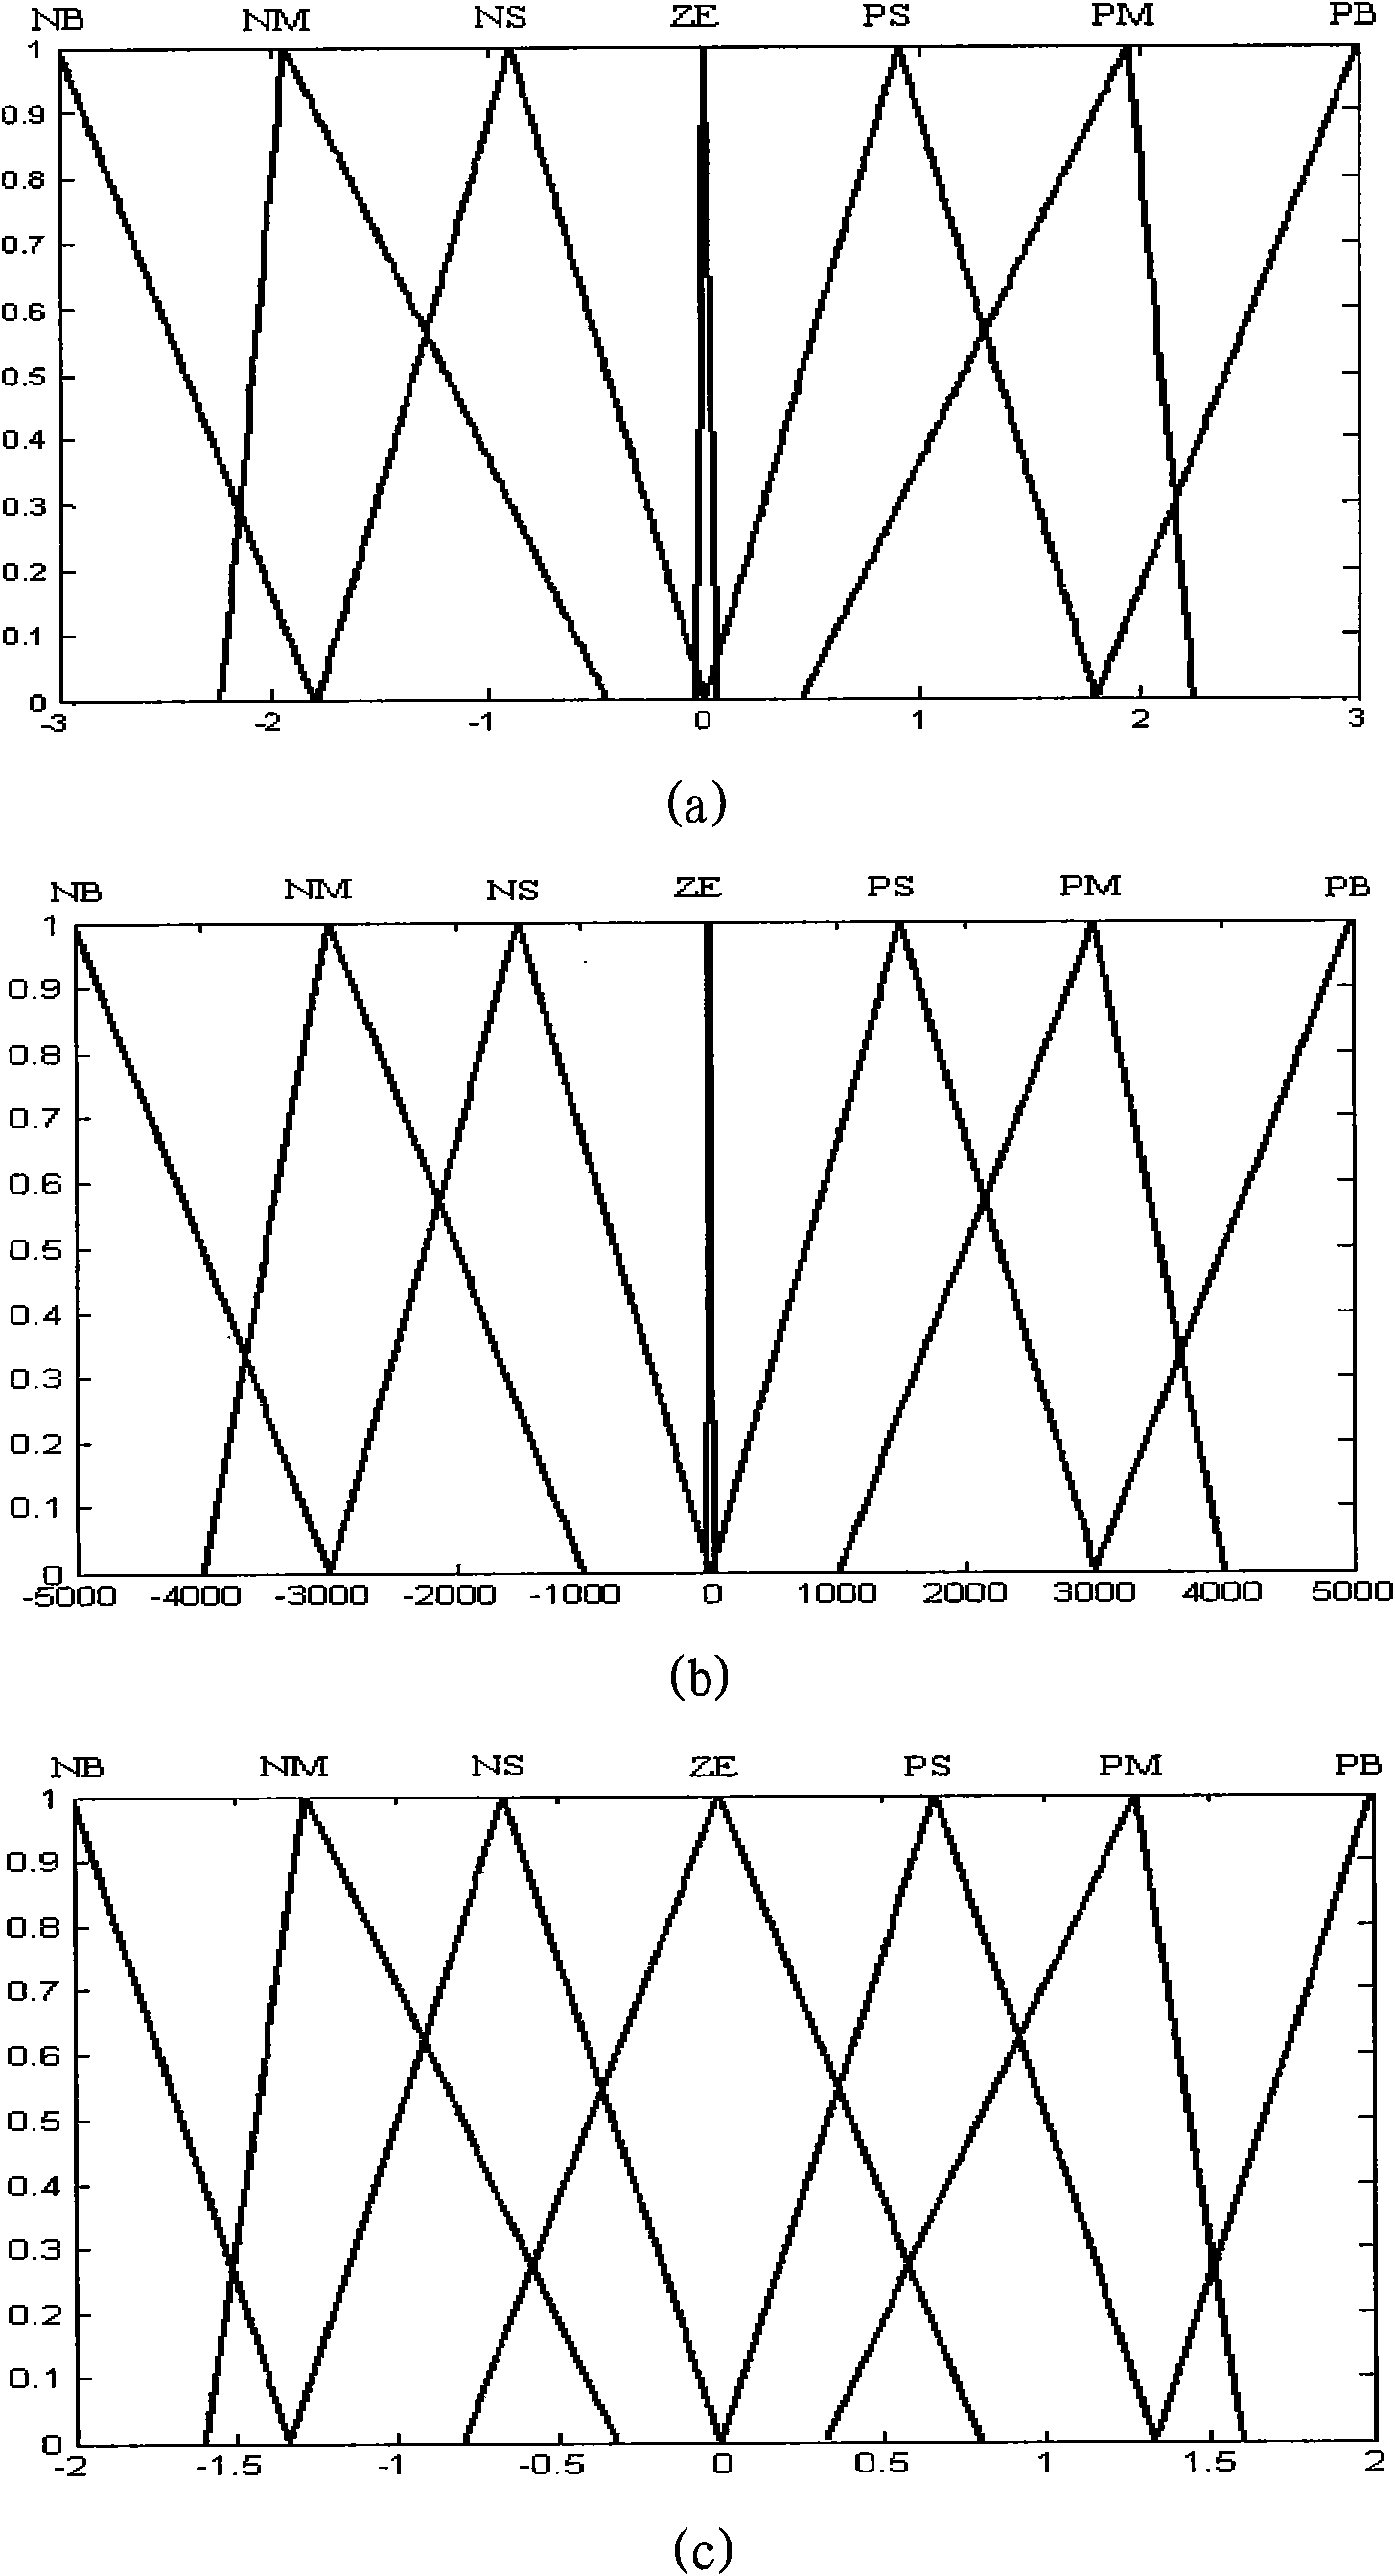 Modified fuzzy sliding mode controlling method of monopole three-phase photovoltaic grid-connected system